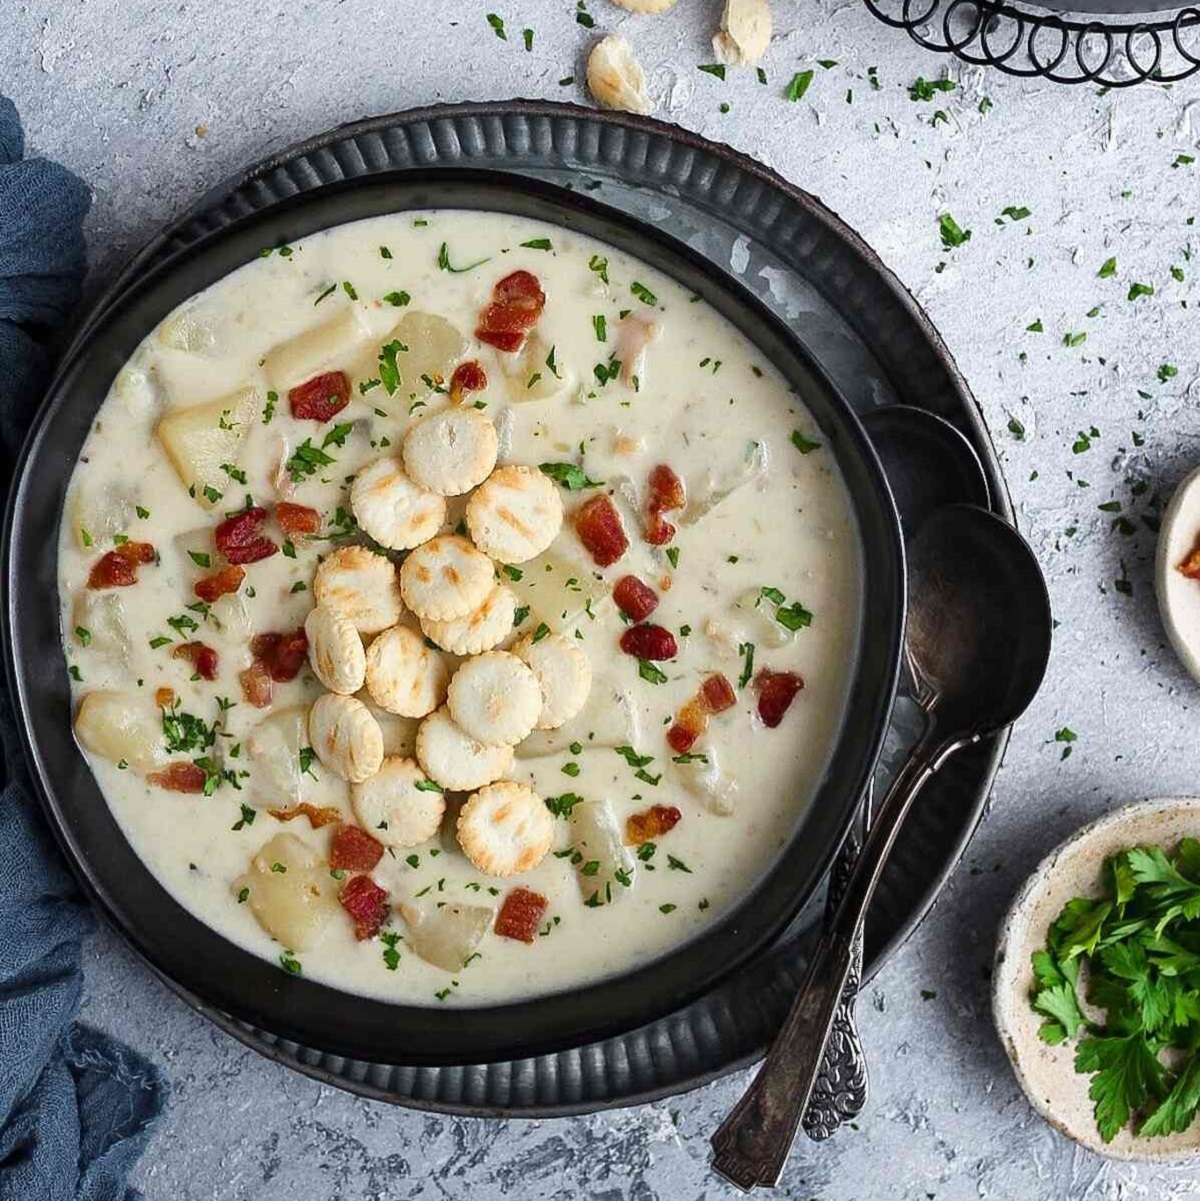 https://aromaticessence.co/wp-content/uploads/2022/11/Instant-pot-clam-chowder-featured.jpg